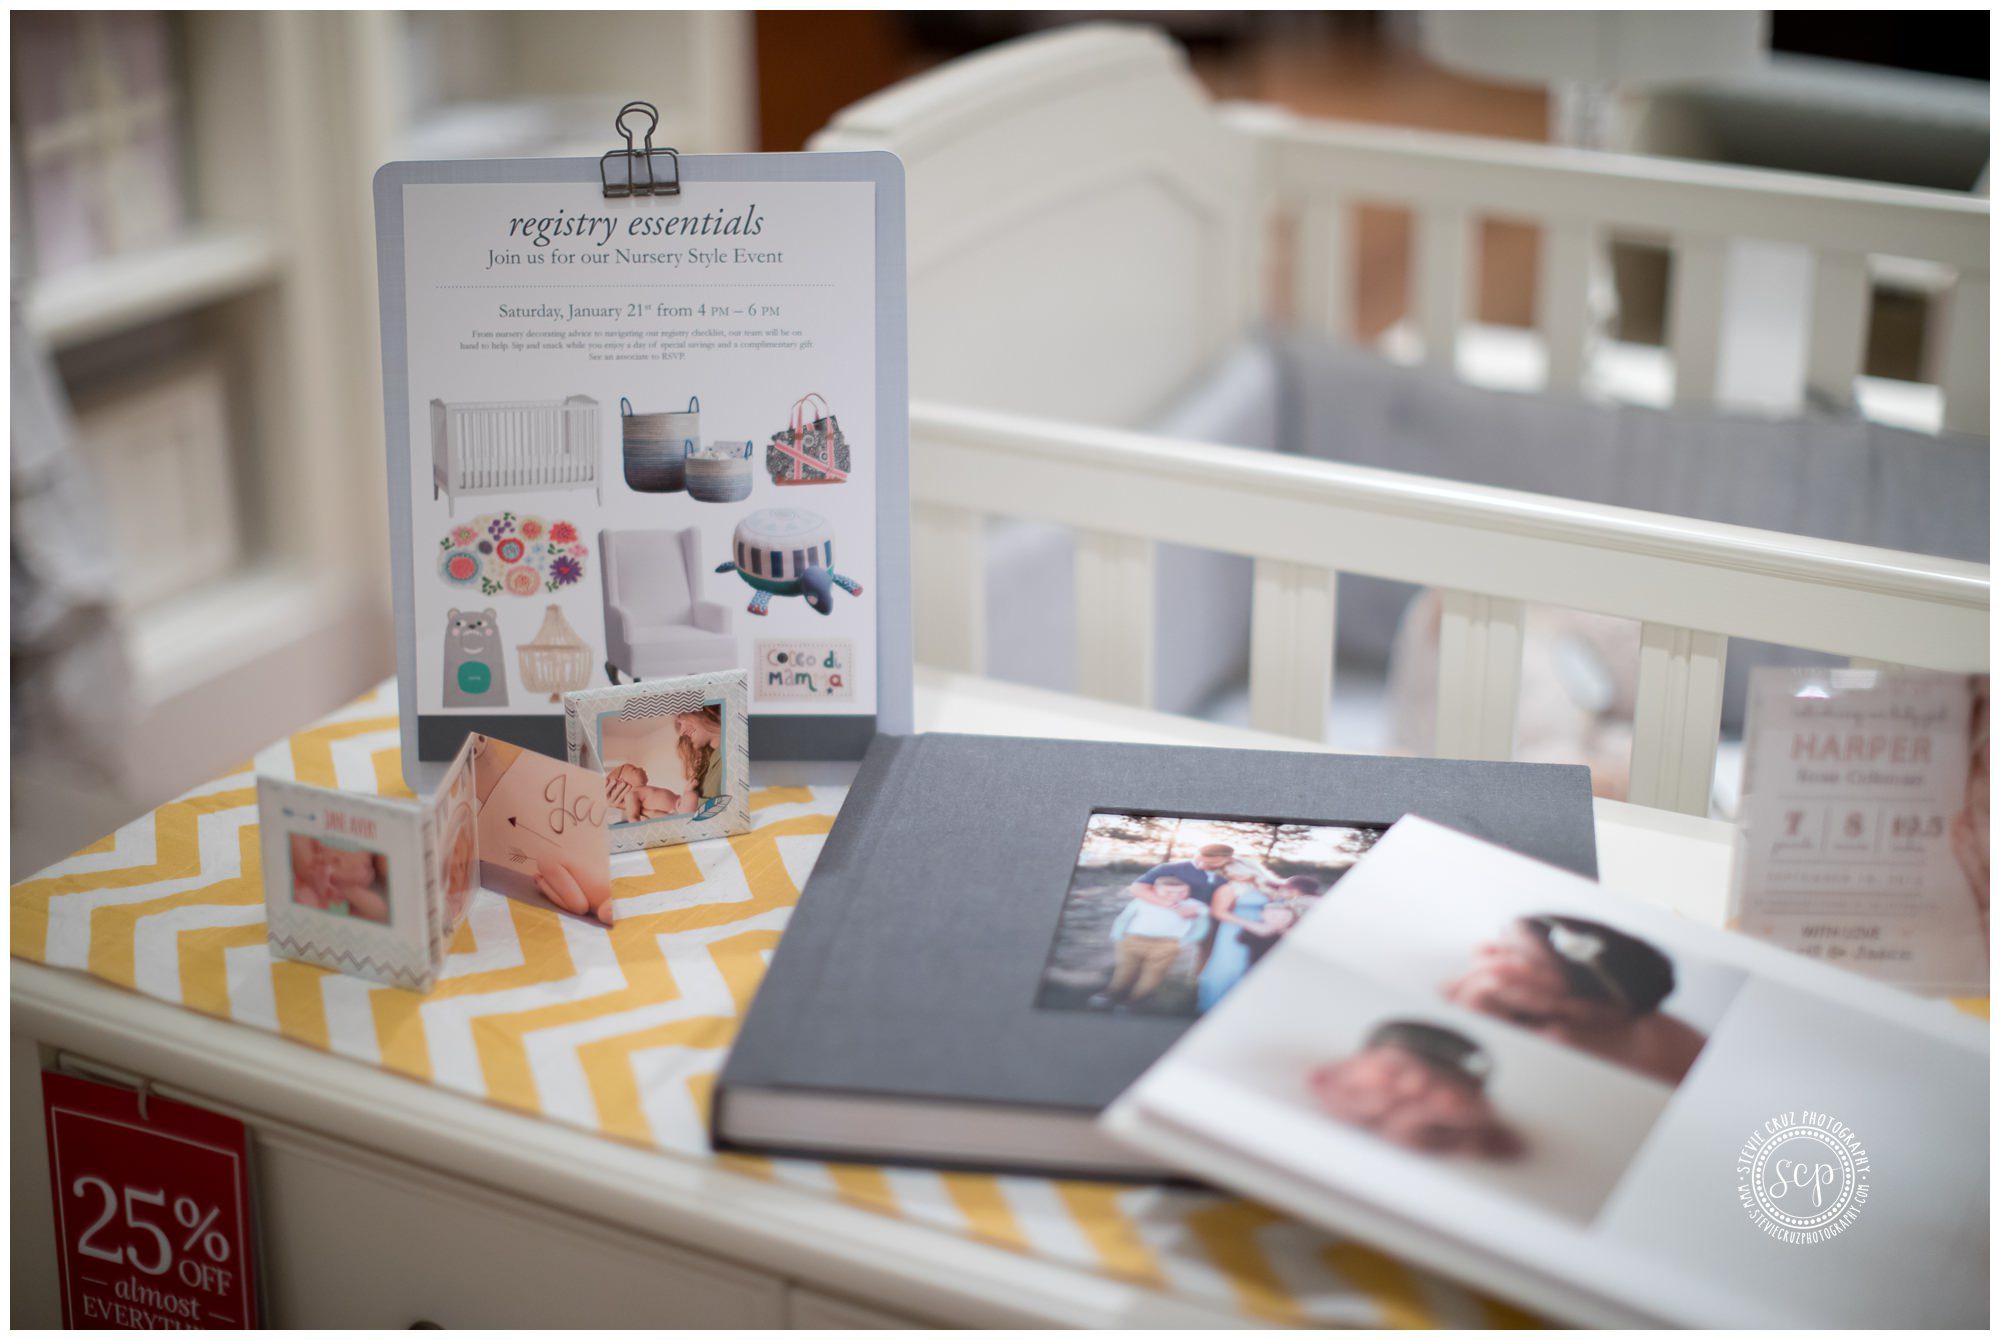 If you are expecting , check out the registry essentials list and book your maternity photographer